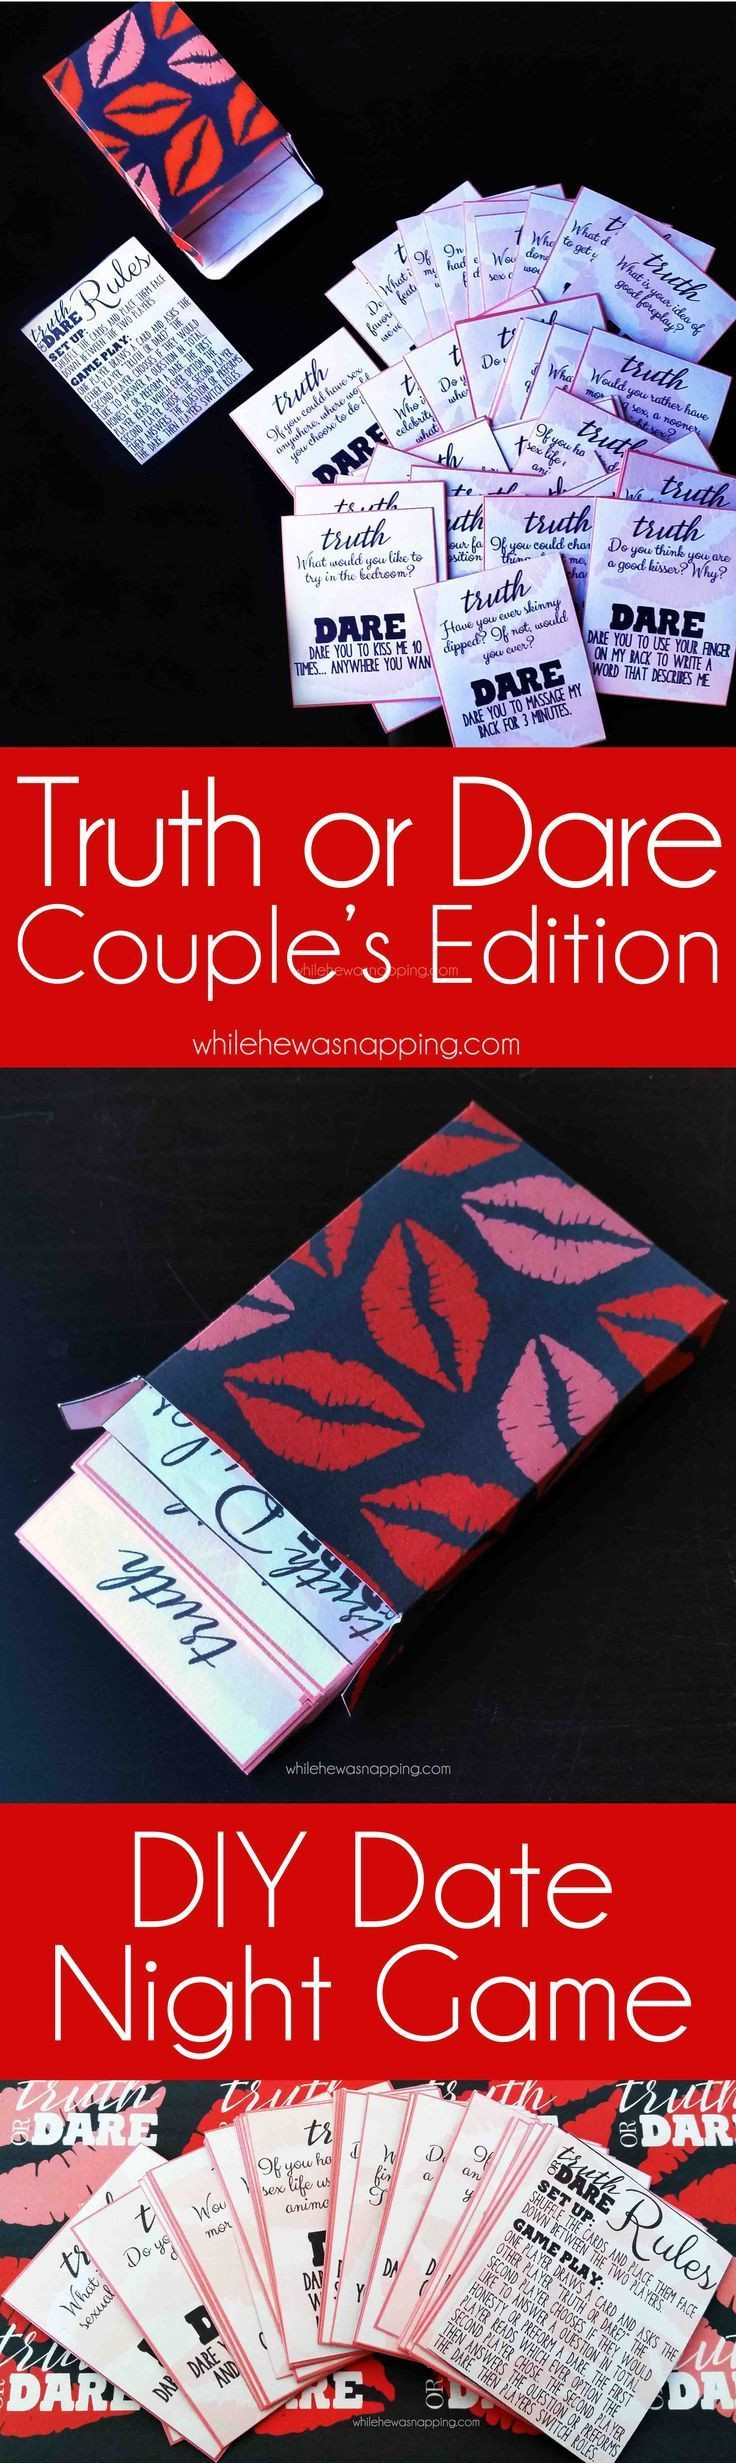 Activity Gift Ideas For Couples
 Truth or Dare Couple s Edition